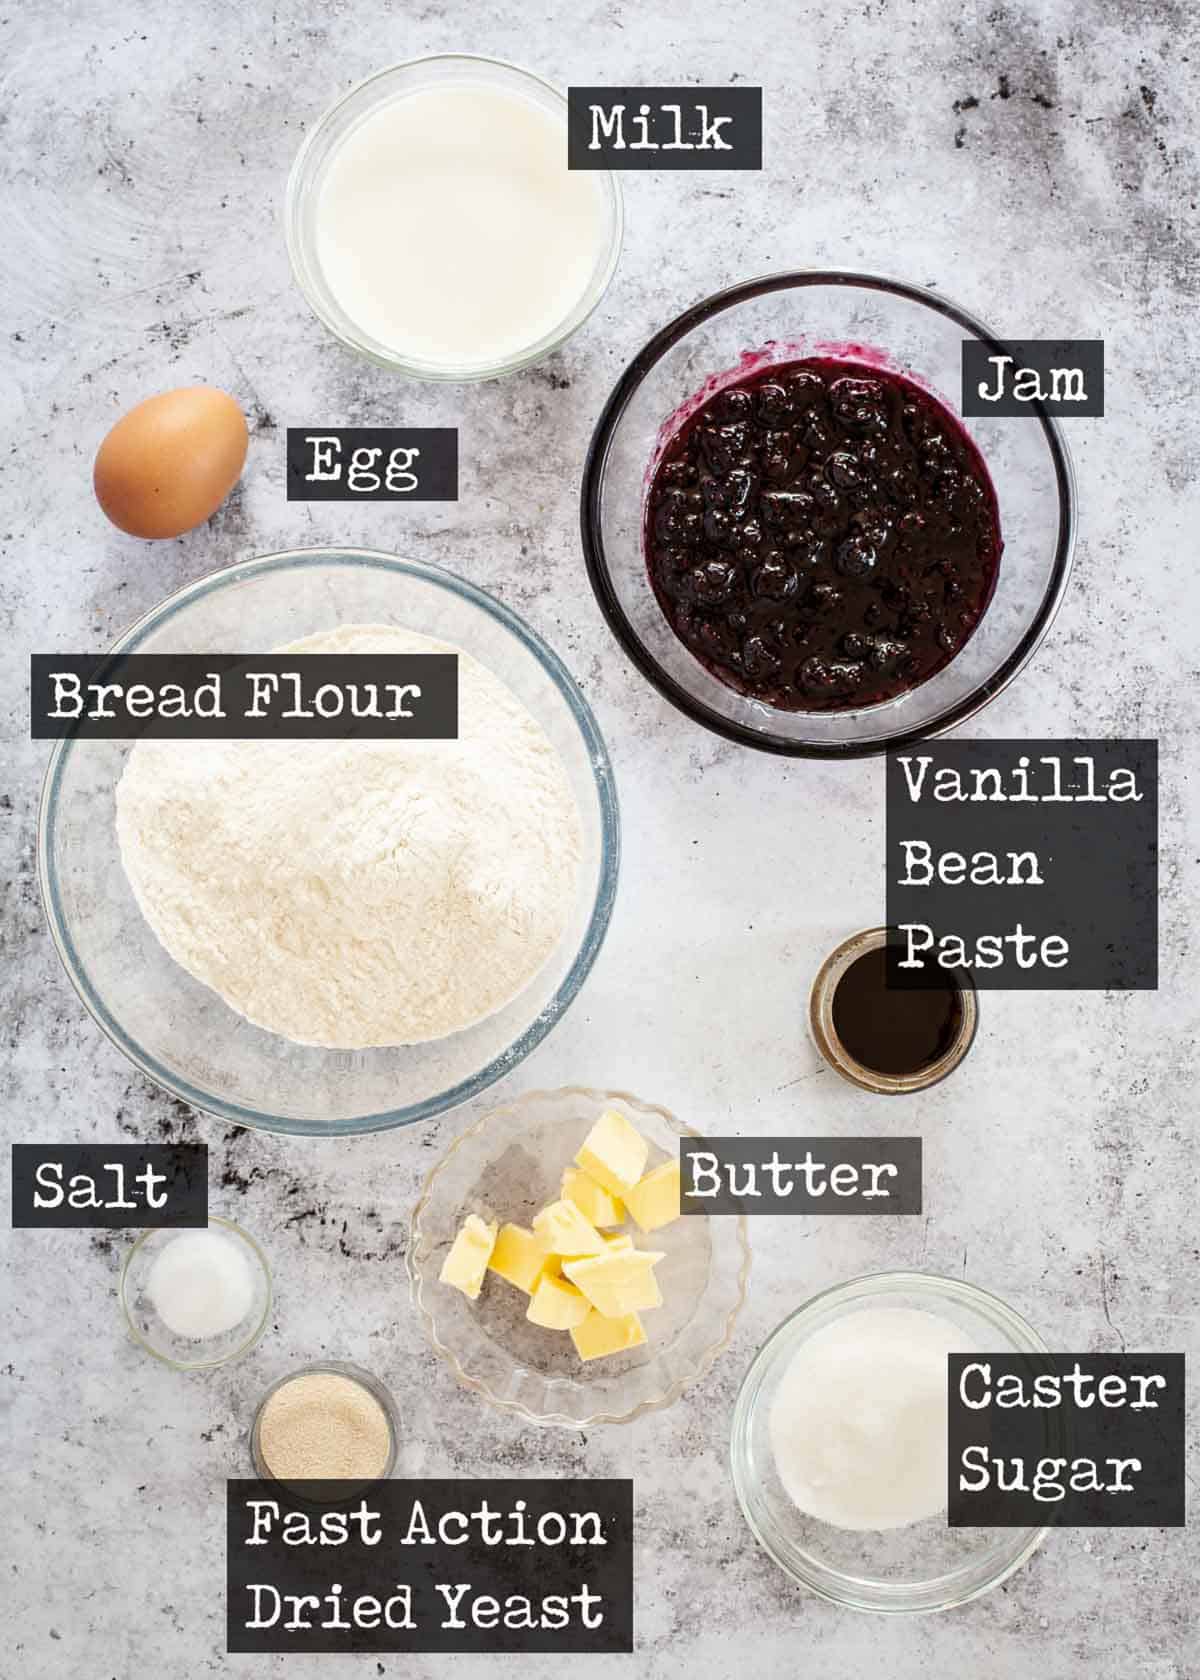 Jam Doughnut ingredients with text overlay